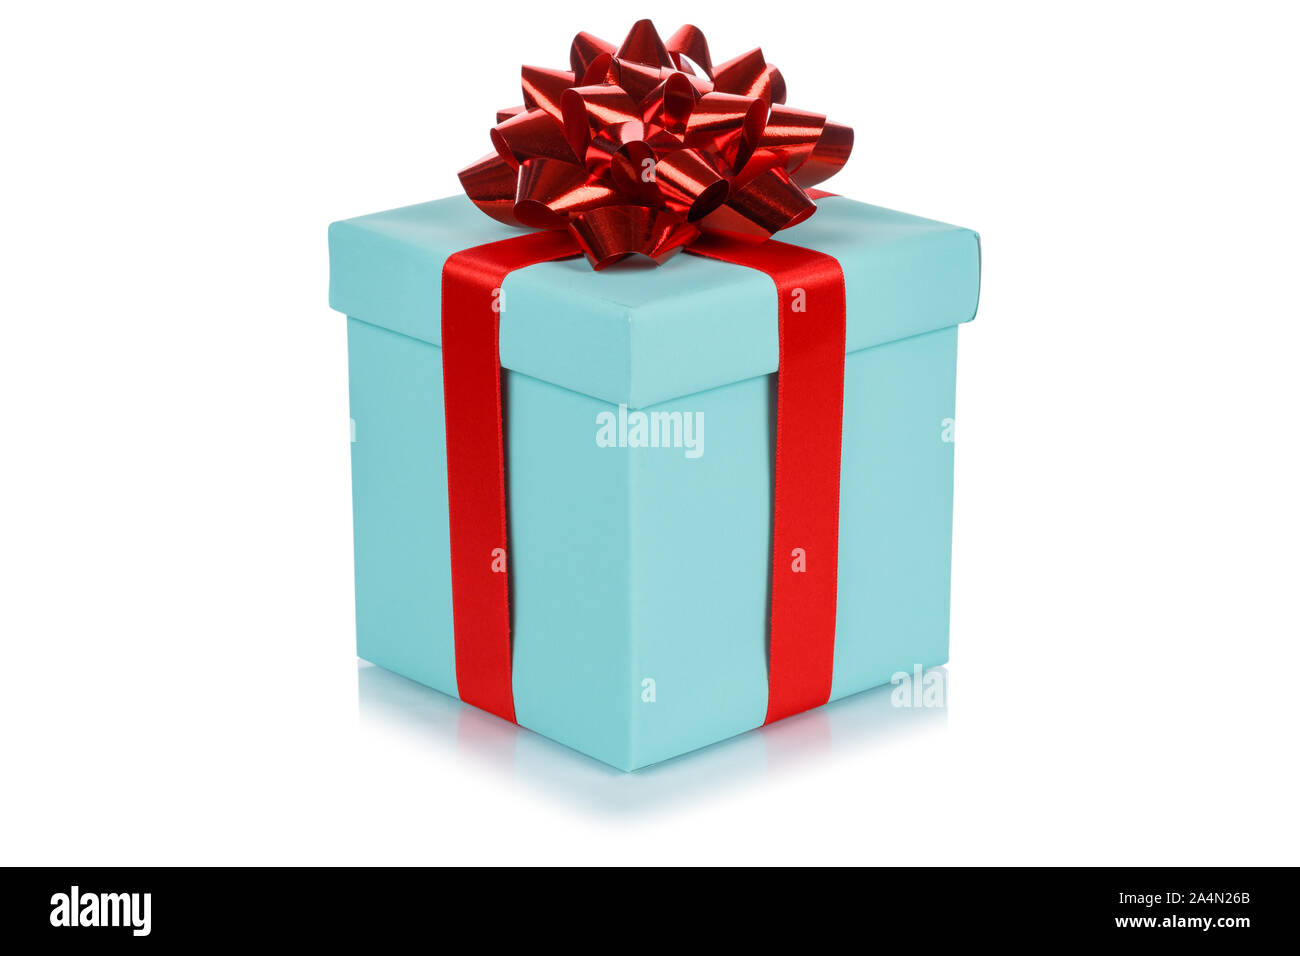 Birthday gift christmas present turquoise box isolated on a white background Stock Photo